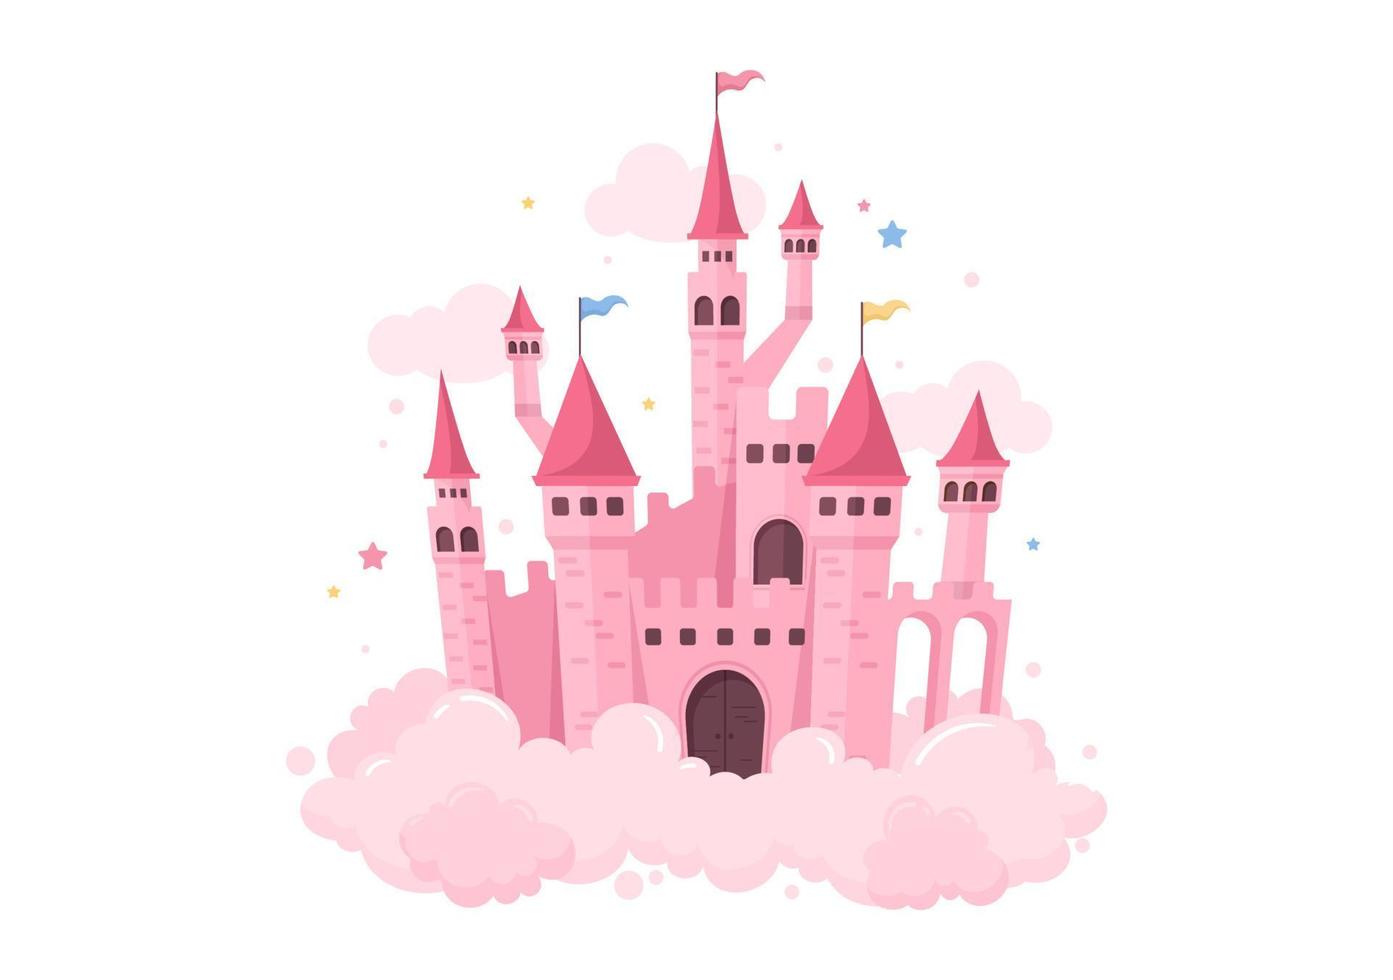 Castle with Majestic Palace Architecture and Fairytale Like Scenery in Cartoon Flat Style Illustration vector